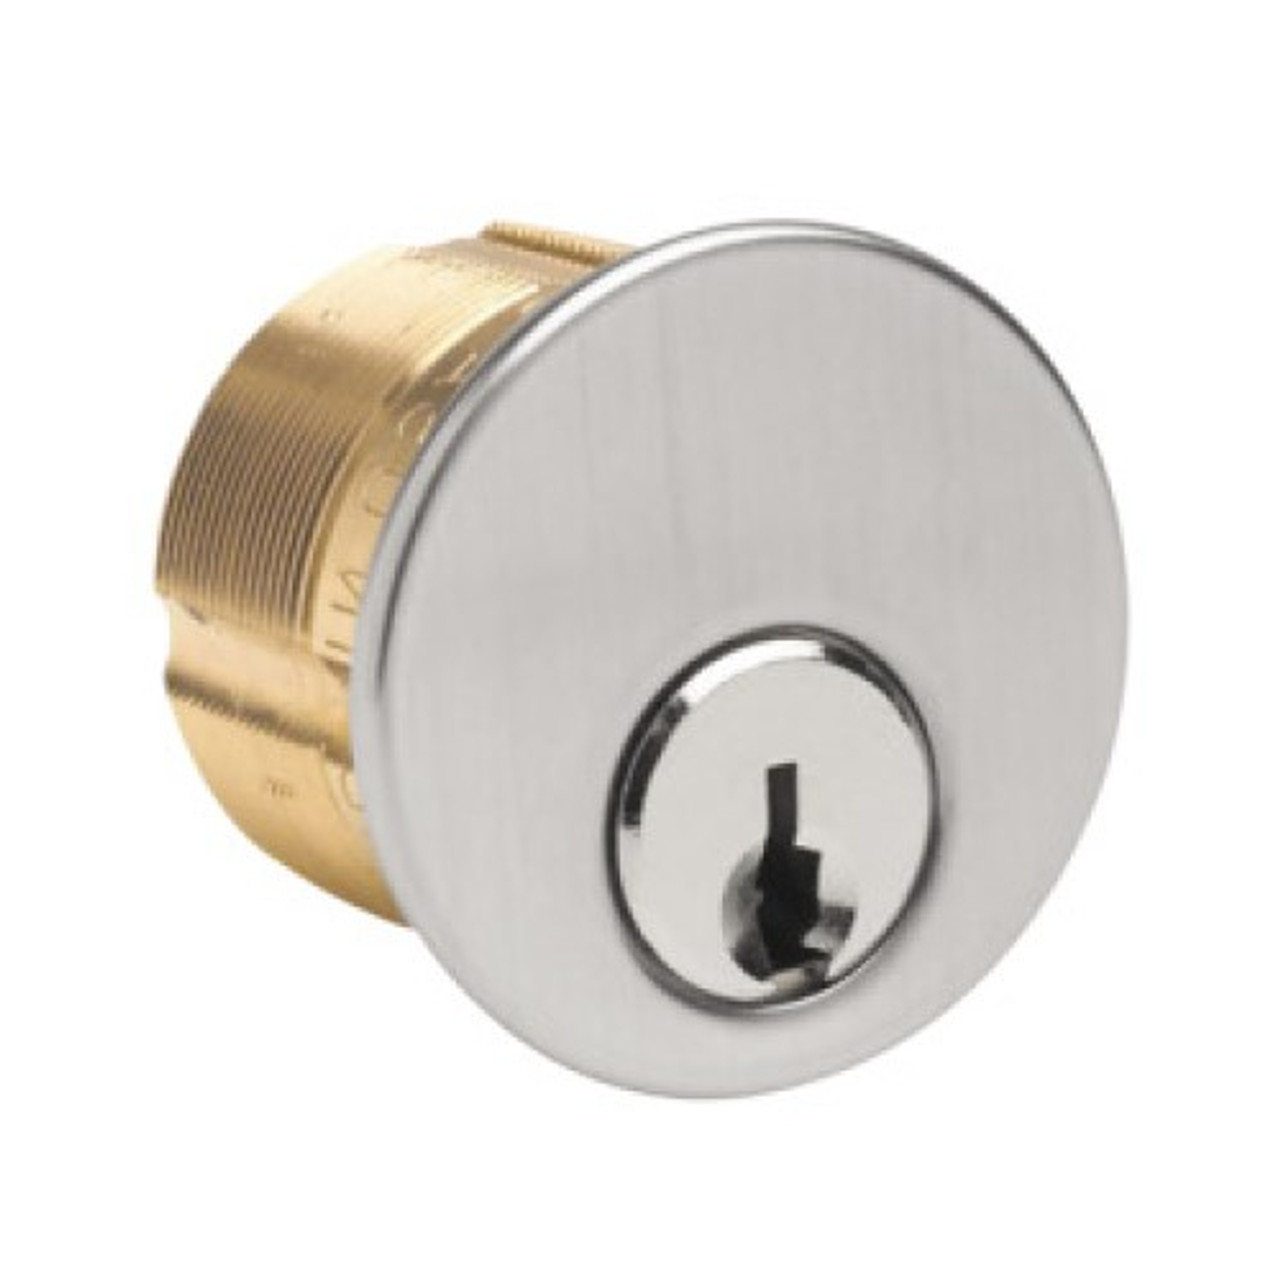 Ilco 7186CD1 Mortise Cylinder 1-1/8"